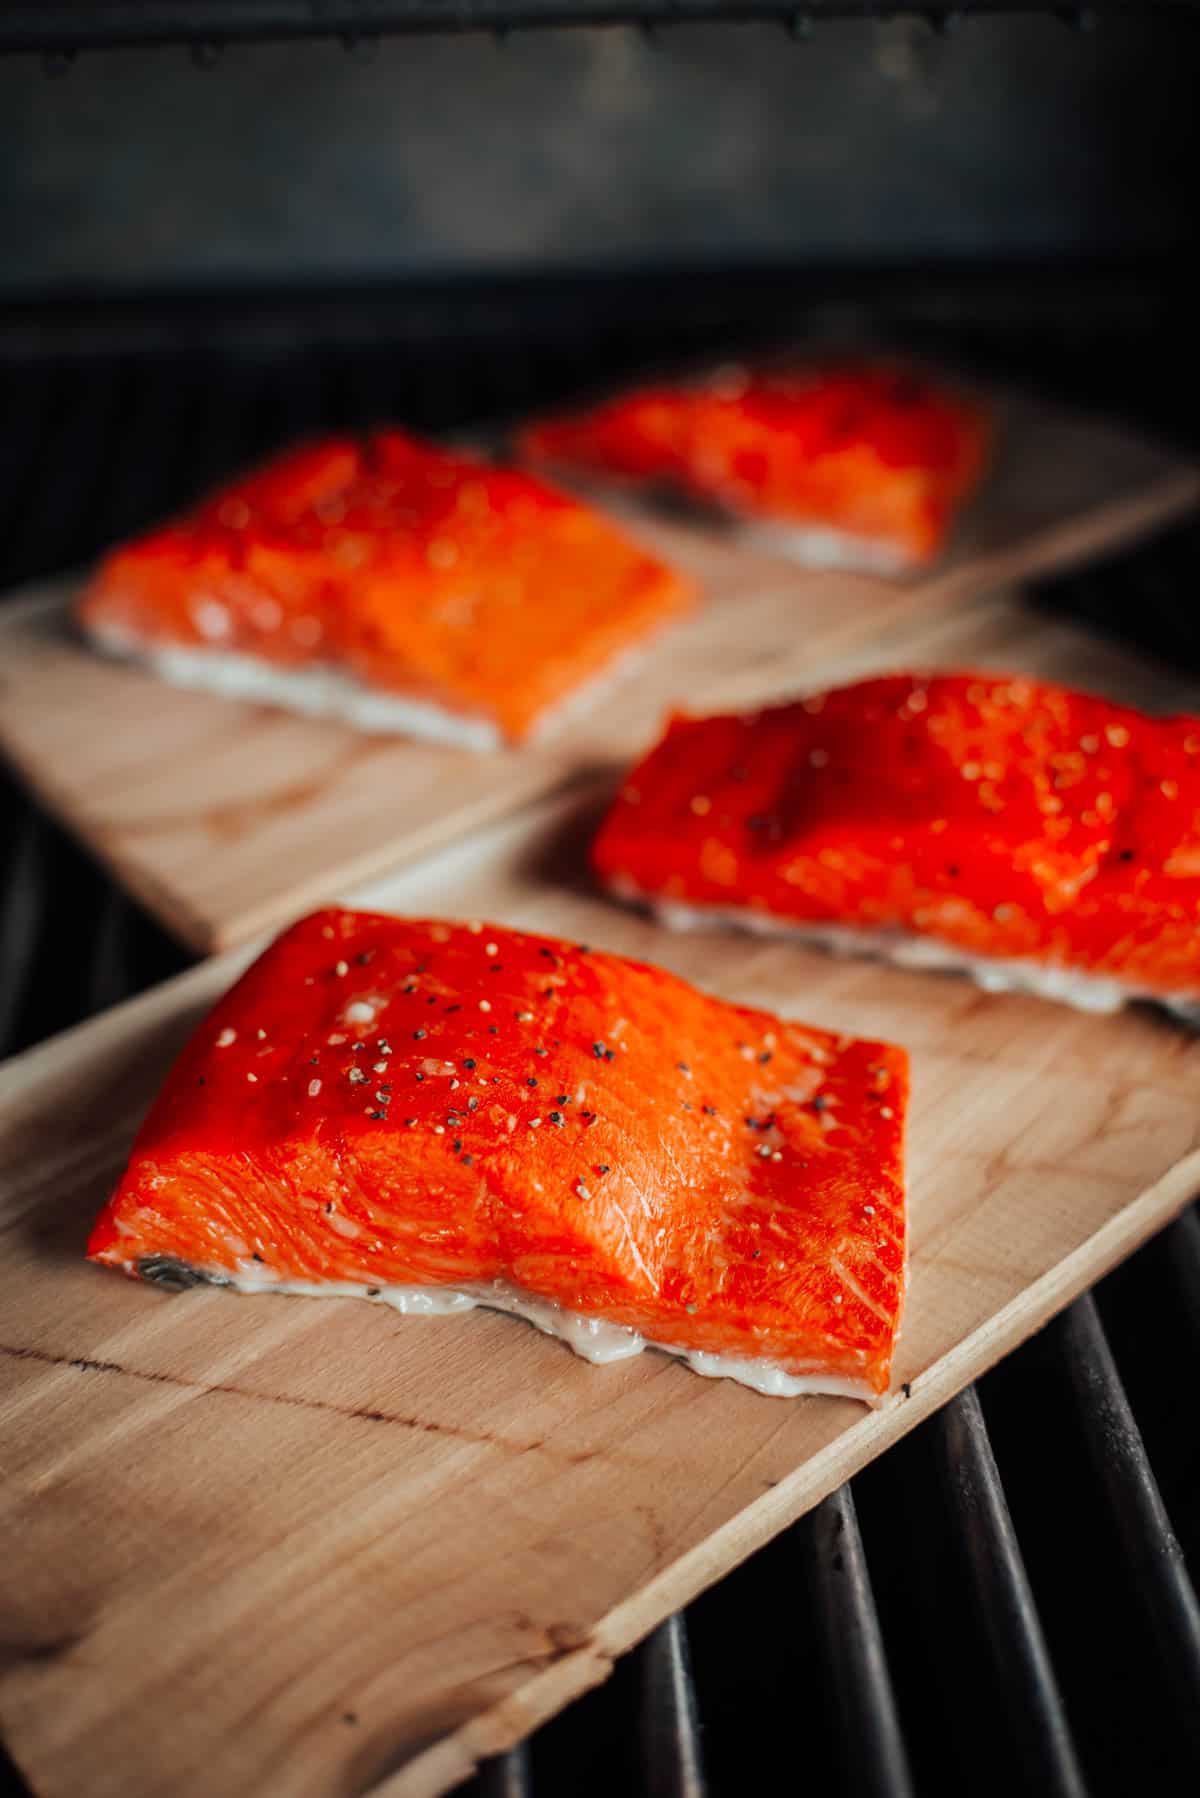 Several salmon fillets seasoned with spices are placed on wooden planks cooking on a grill.